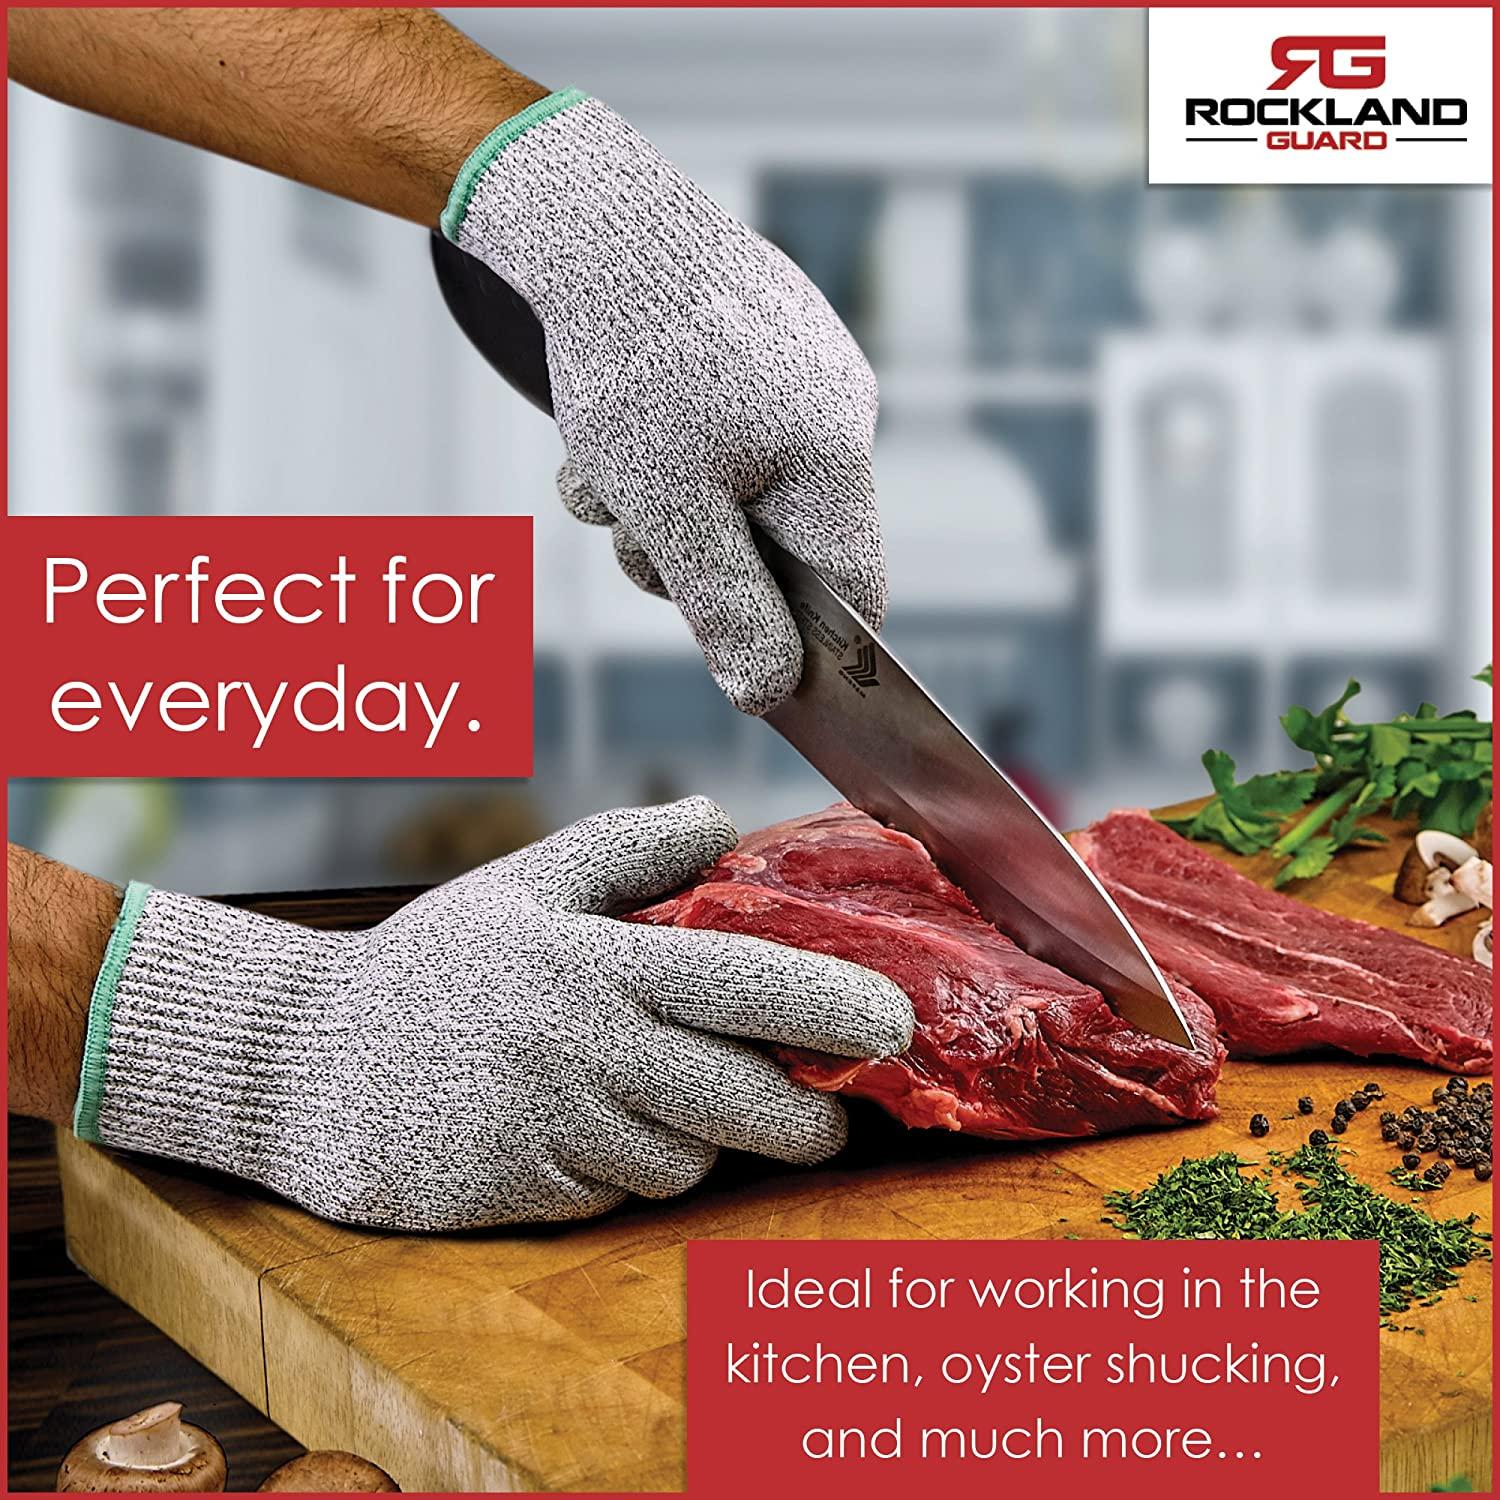 Rockland Guard Oyster Shucking Set- High Performance Level 5 Protection  Food Grade Cut Resistant Gloves with 3.5 Stainless steel Oyster Knife,  perfect set for shucking oysters Large